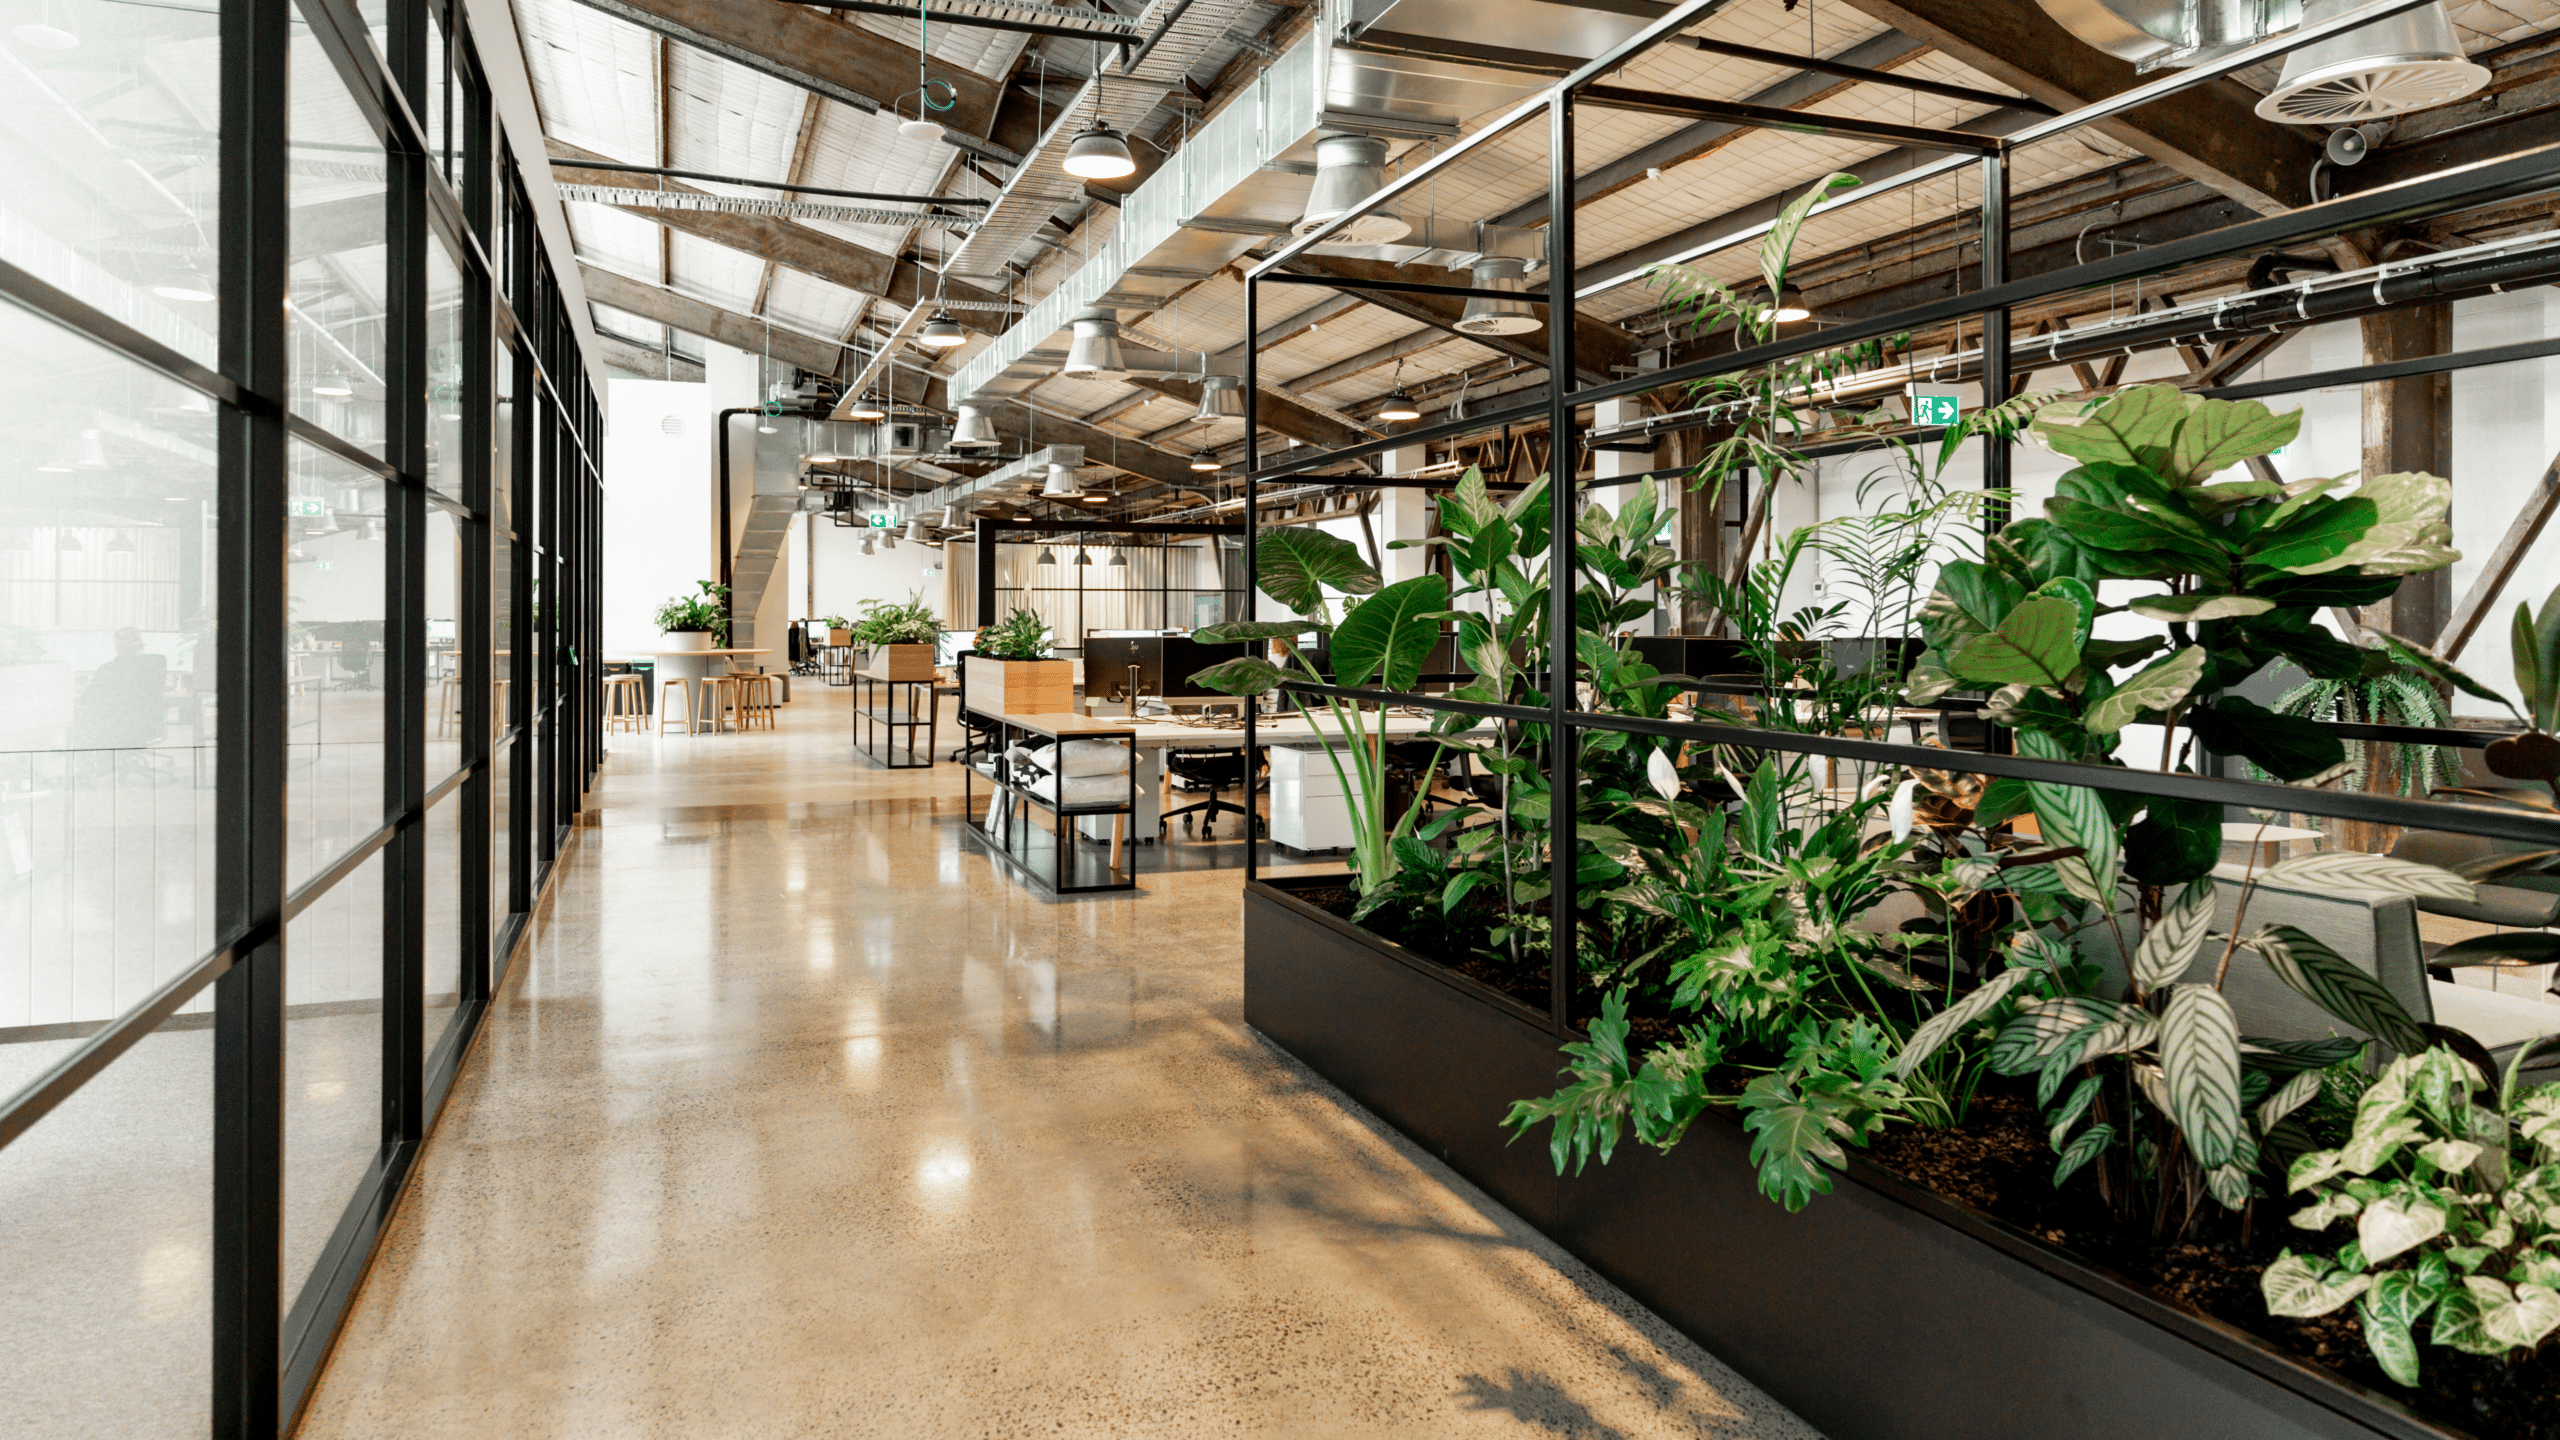 Office with many natural elements like plants, timber and stone.